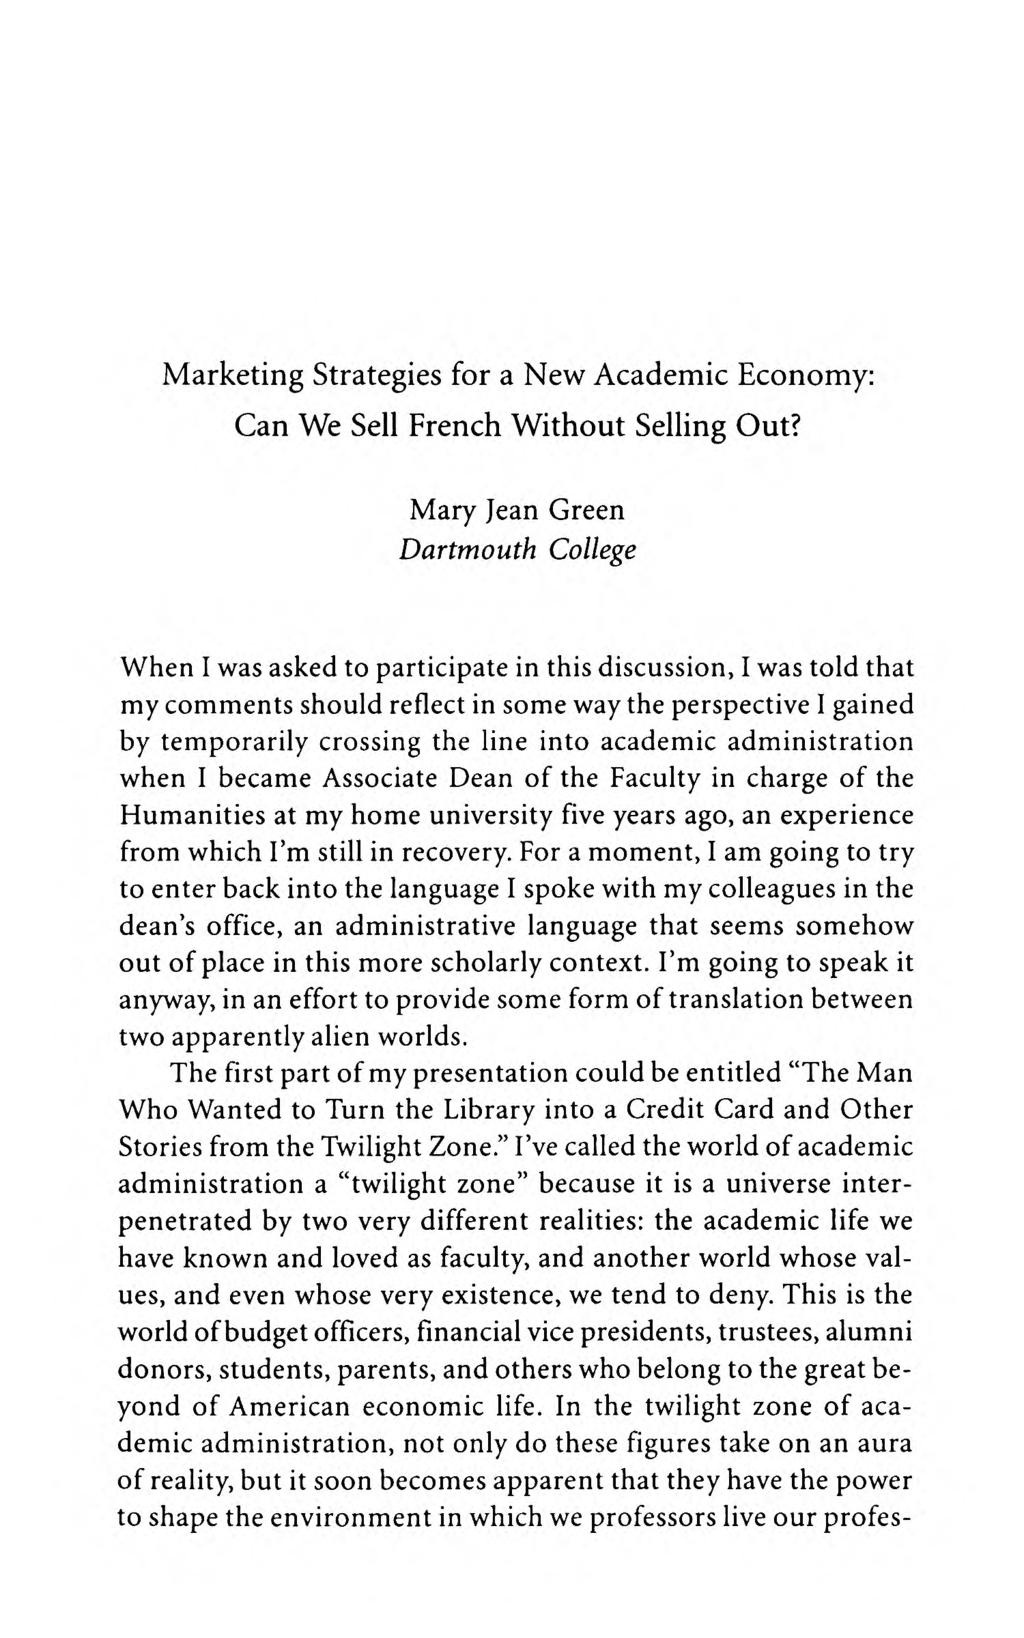 Green: Marketing Strategies for a New Academic Economy: Can We Sell Fren Marketing Strategies for a New Academic Economy: Can We Sell French Without Selling Out?